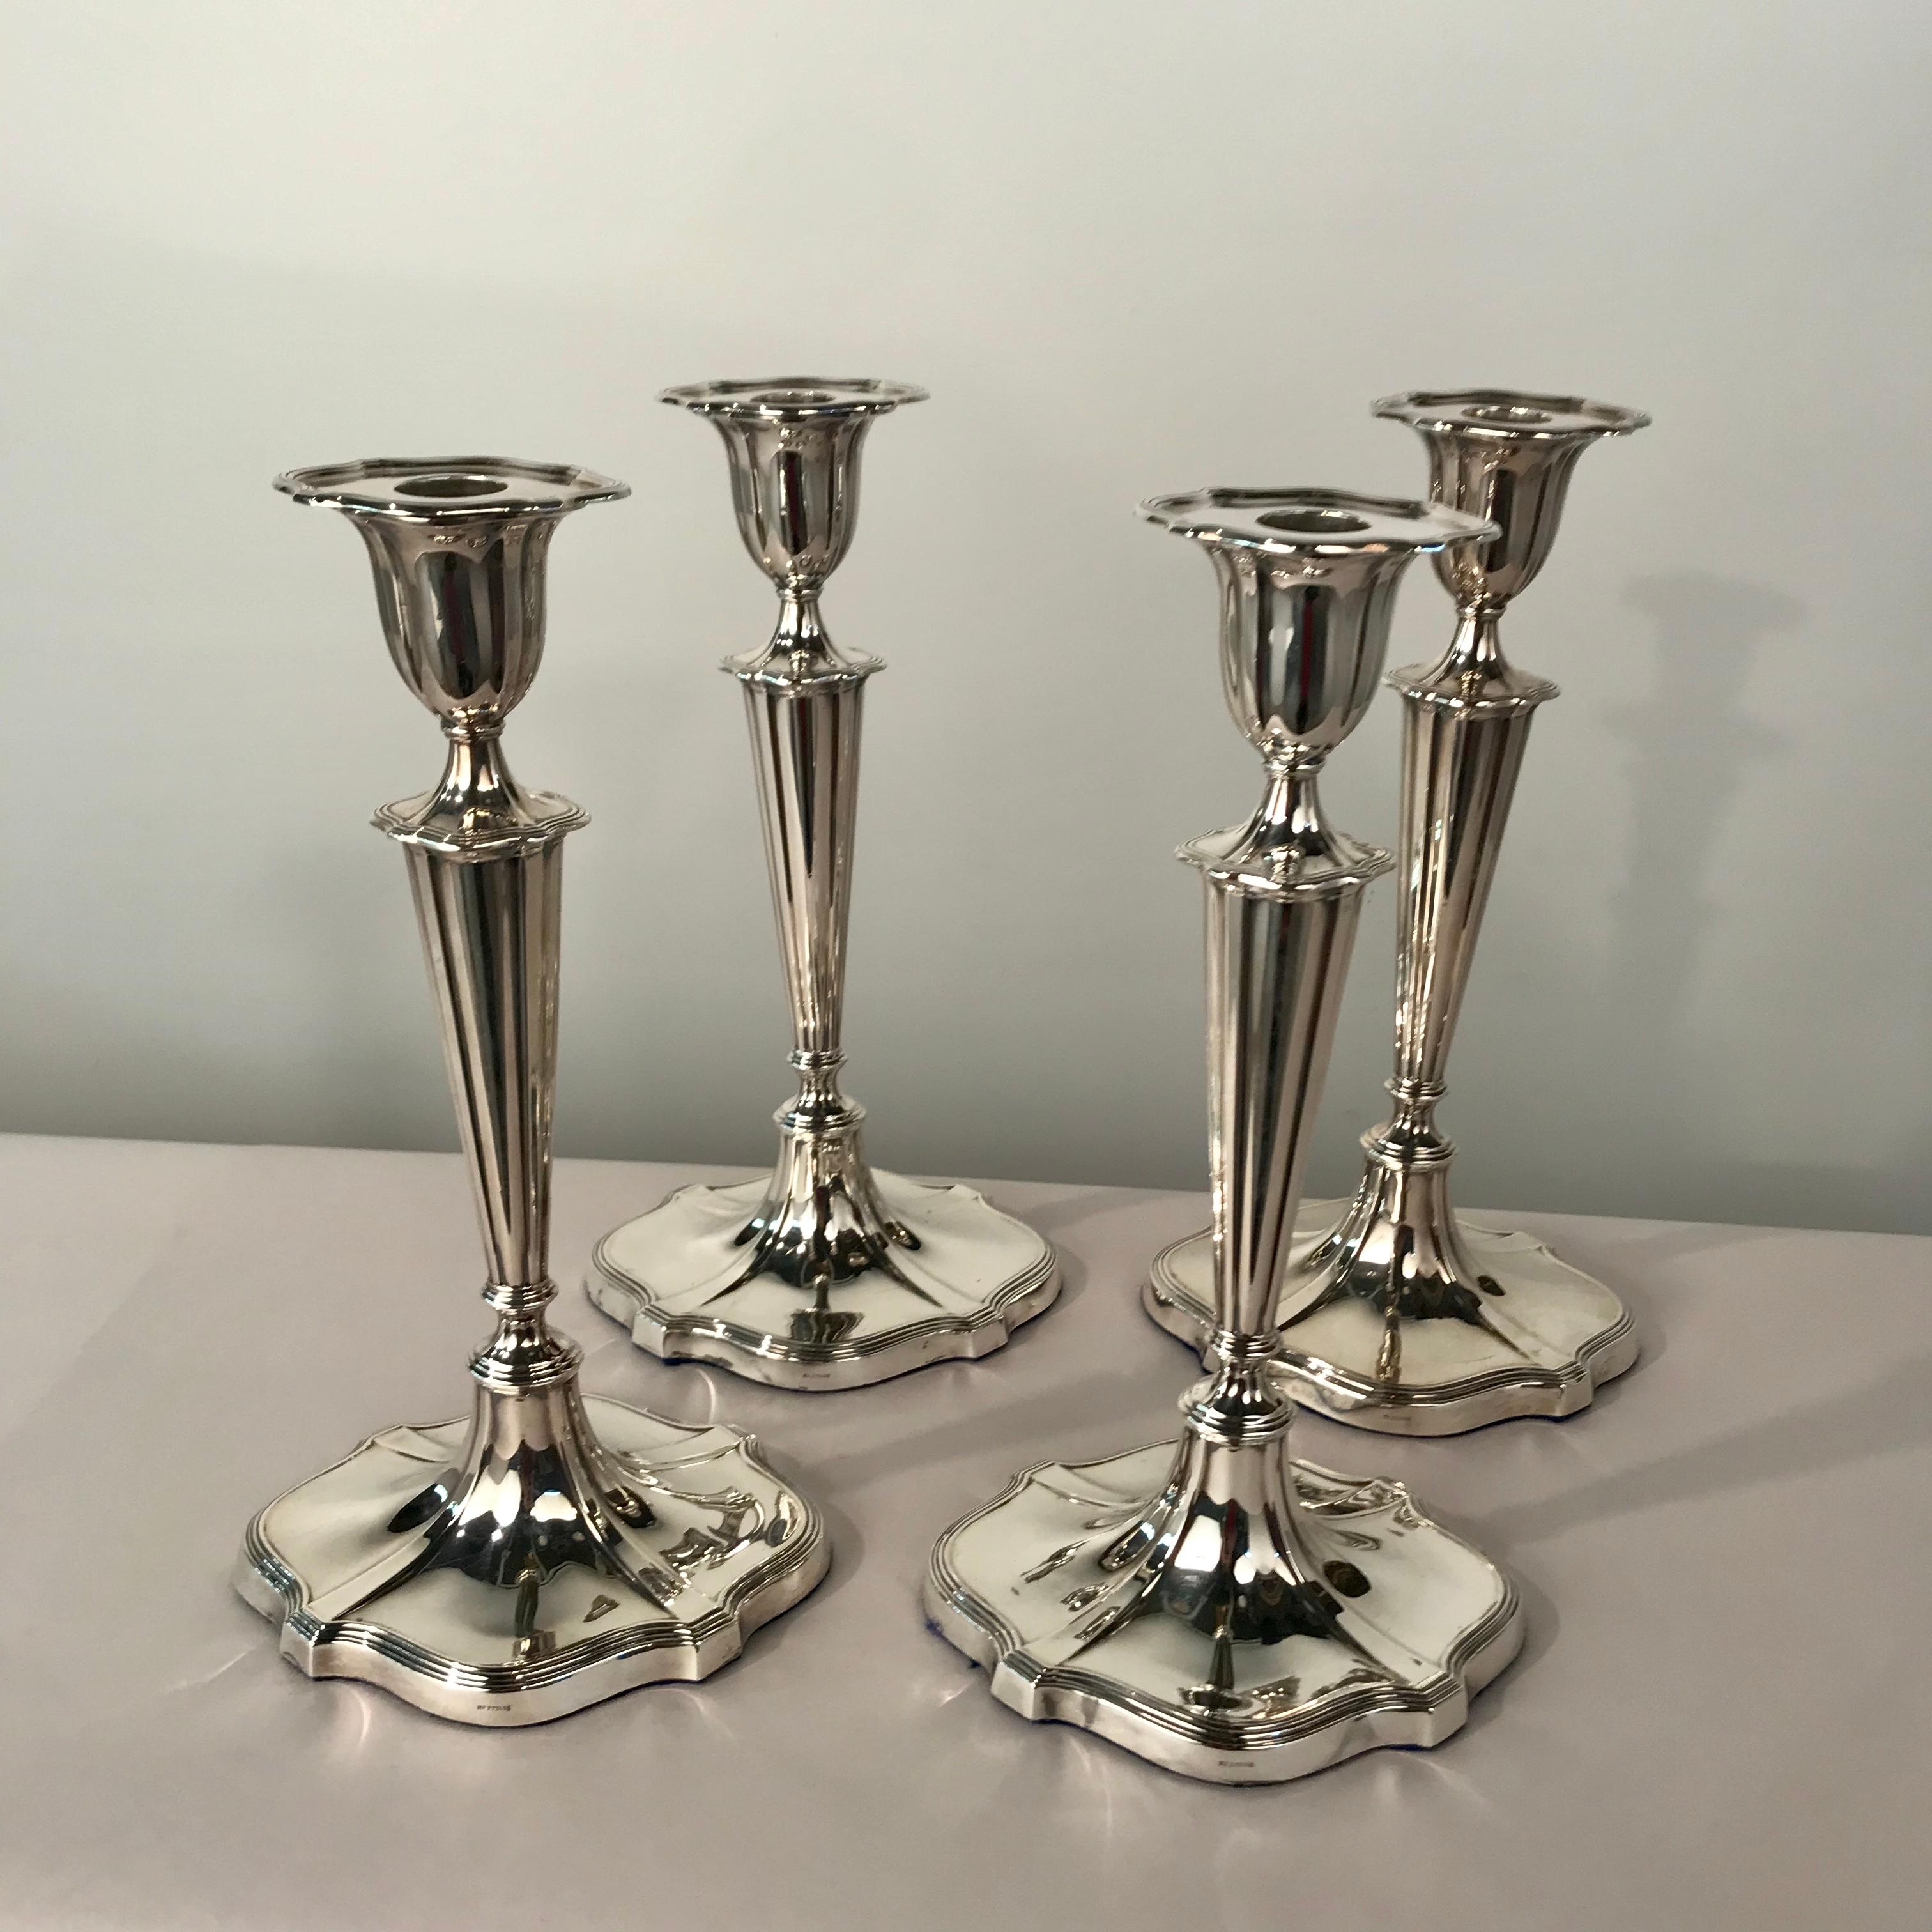 Each on an elegant shaped oval foot, with tapering stems and shaped corresponding drip pans. The overall effect of this set is extremely fine and slender. They are fully marked for London 1903 and with the makers mark for Mappin and Webb.